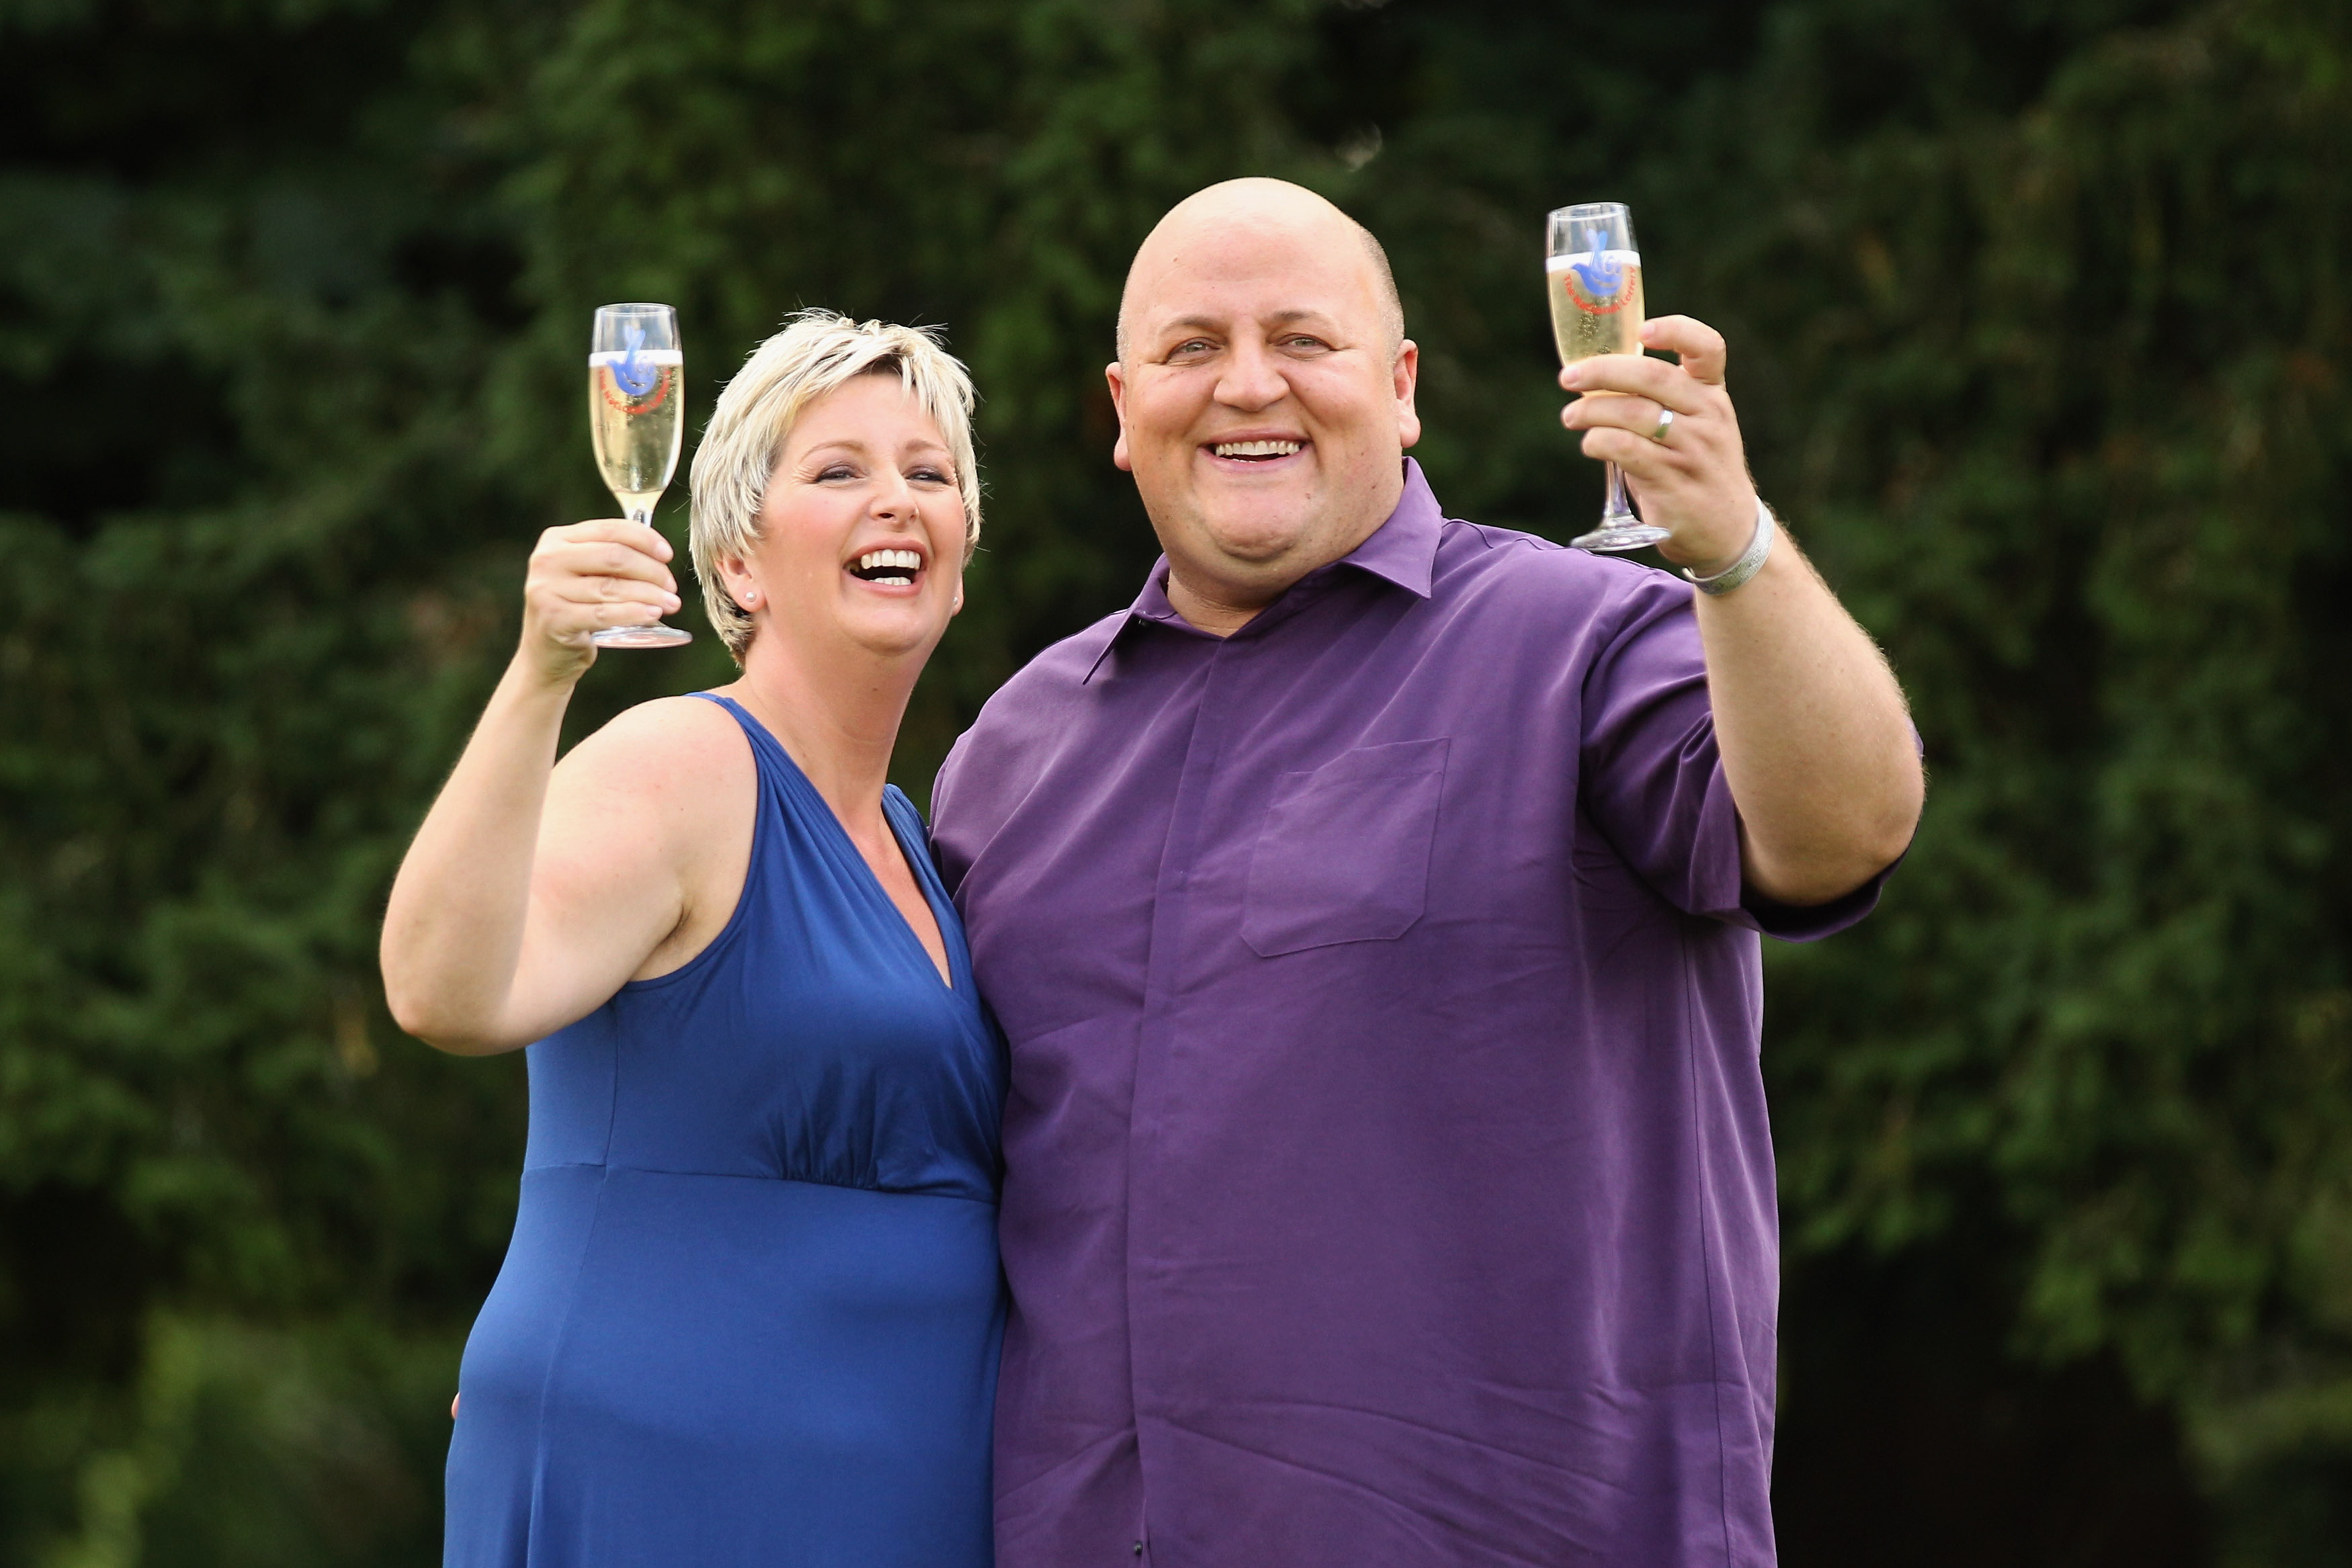 Gillian and Adrian Bayford celebrate winning the jackpot of over 148 million GBP in the EuroMillions lottery on August 14, 2012, in Hatfield Heath, England | Source: Getty Images